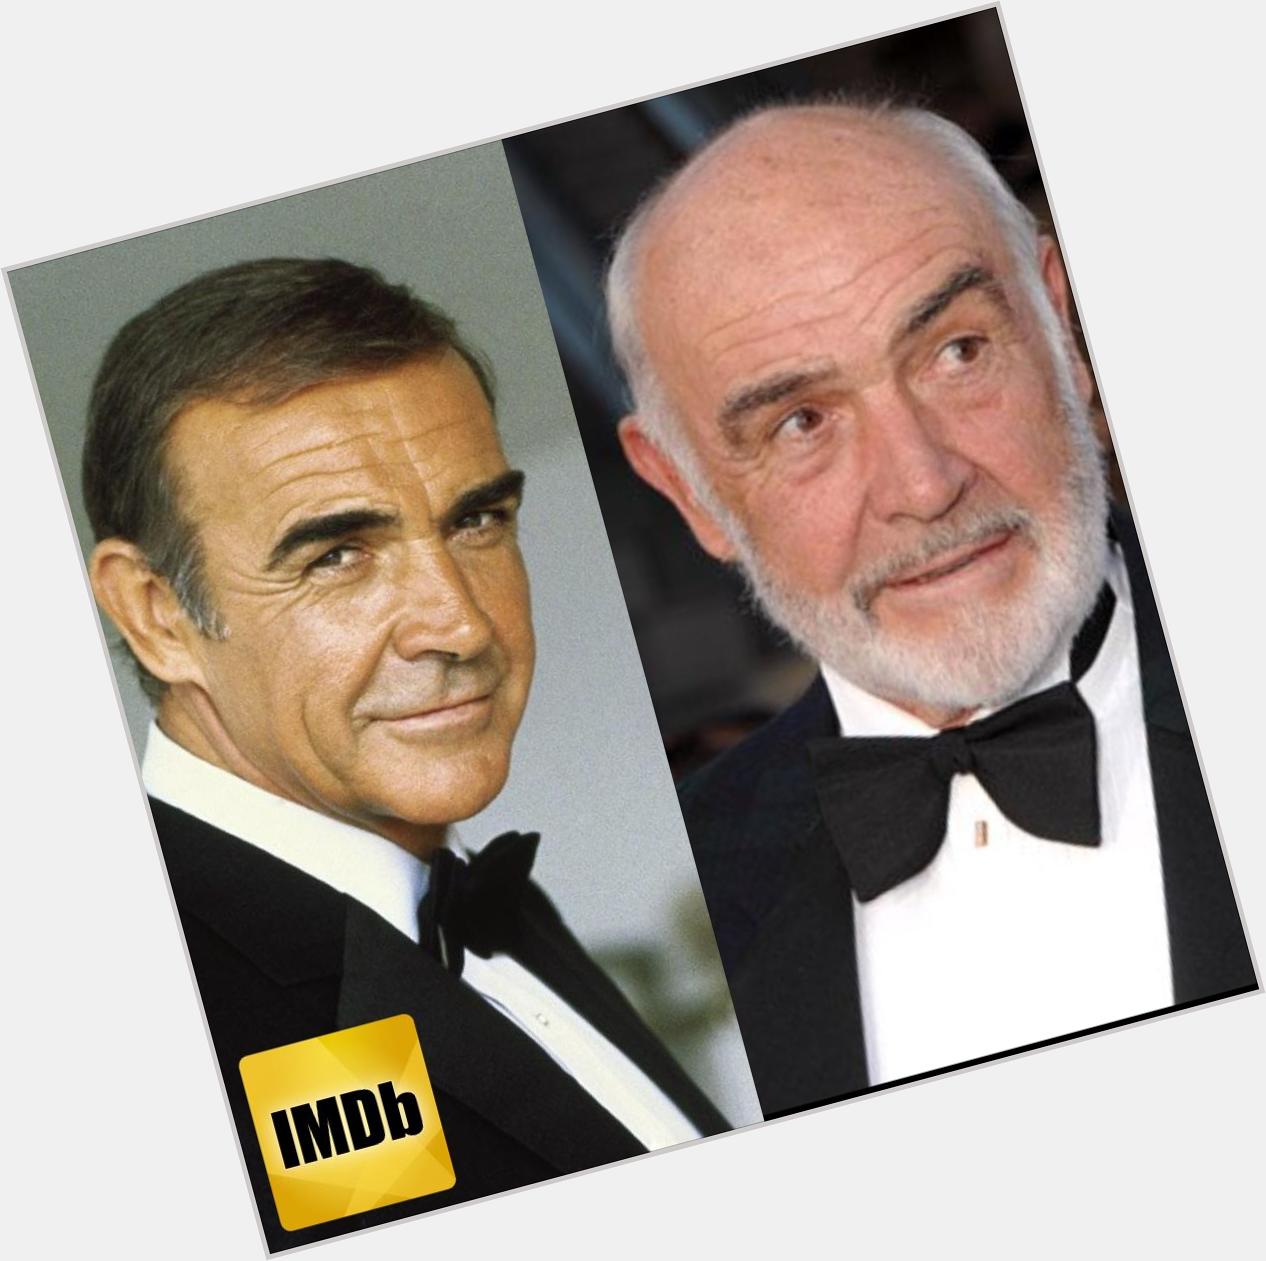   Happy birthday, Sean Connery! The actor turns 85 today. In your opinion, what\s his most memorable role? 